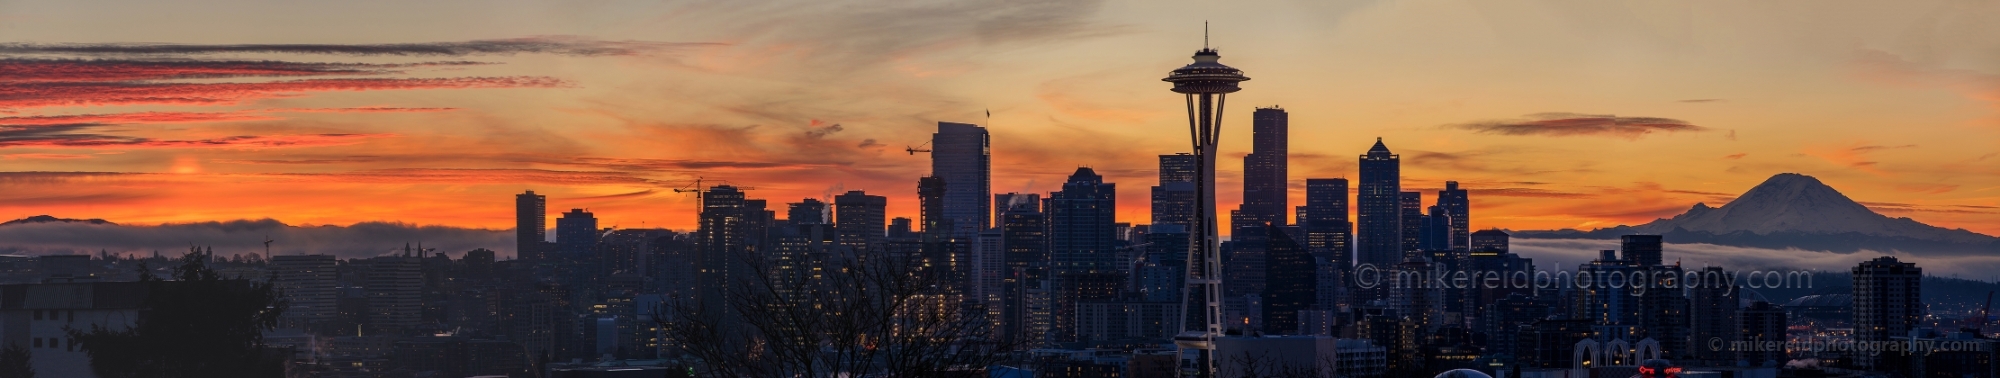 Seattle Sunrise Panorama from Kerry Park